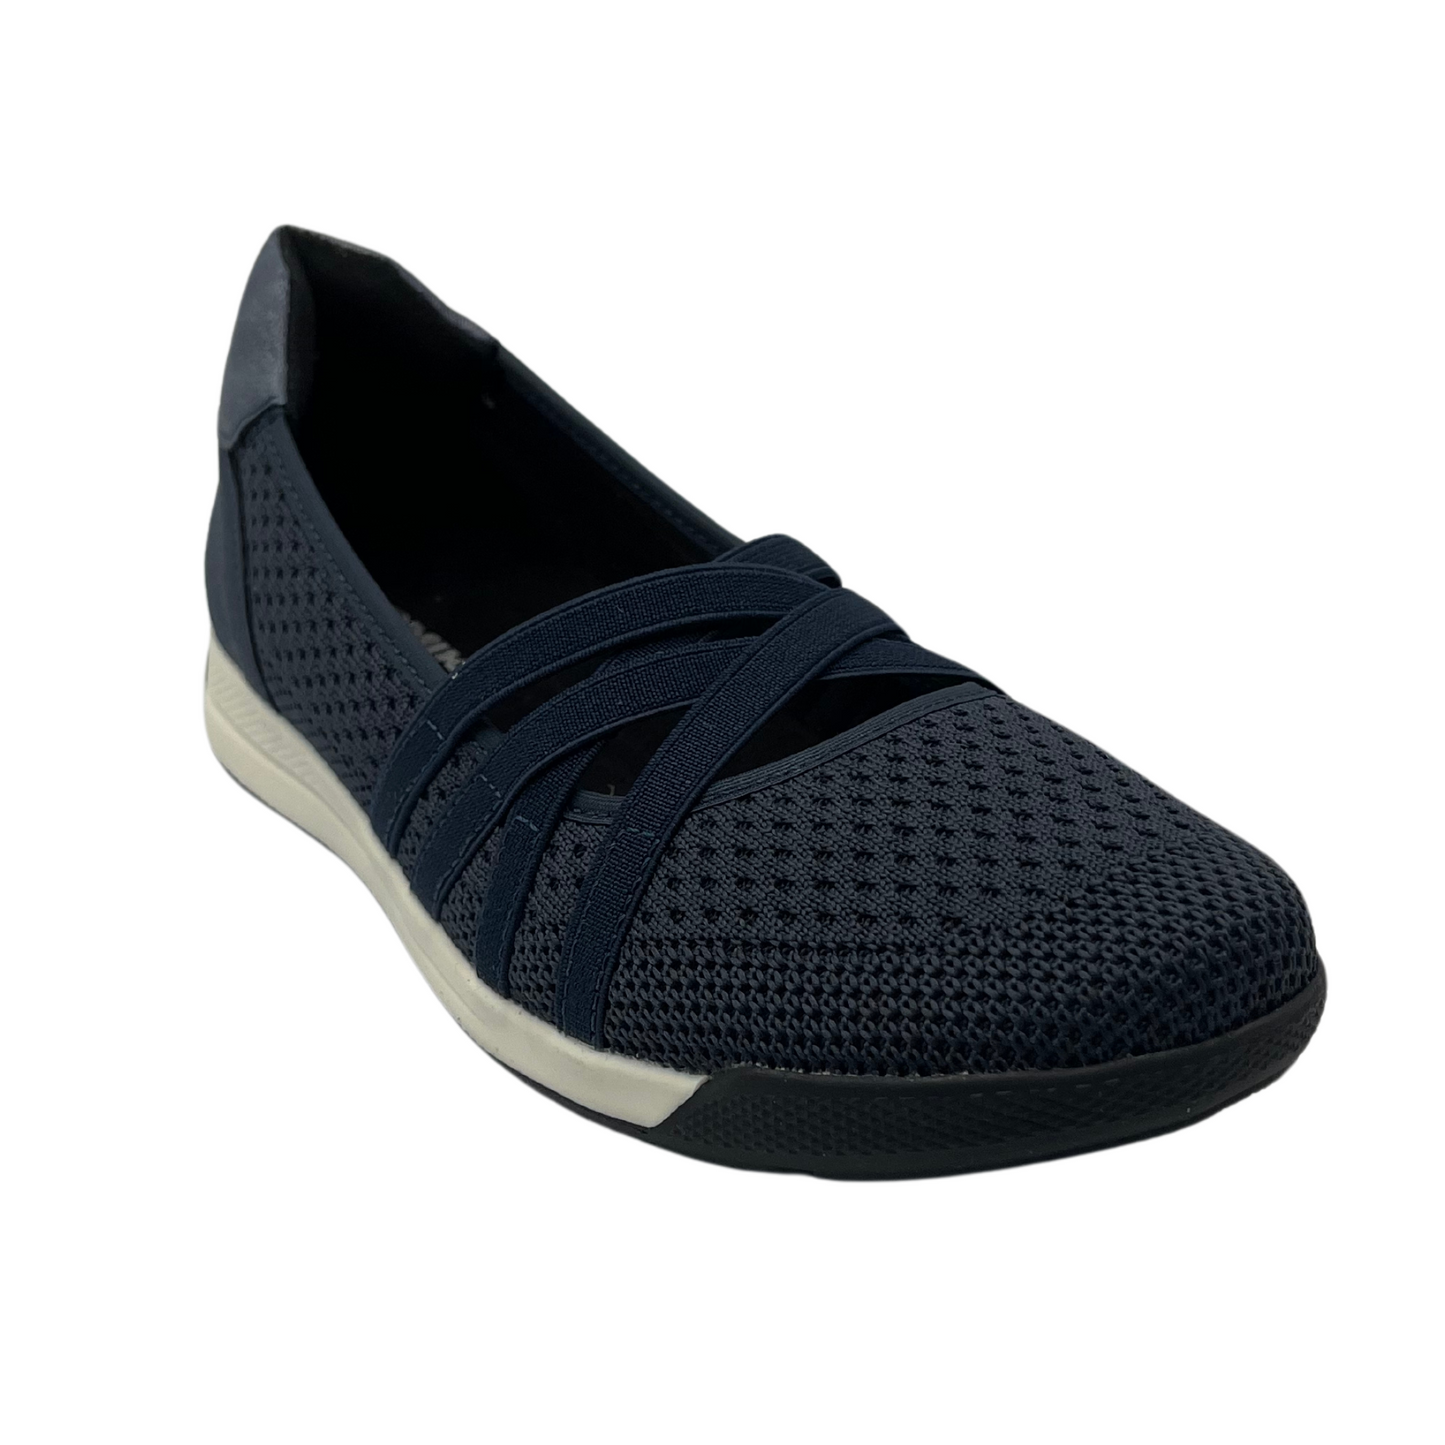 45 degree angled view of navy mesh  flat shoe with criss-cross straps and white and black rubber outsole